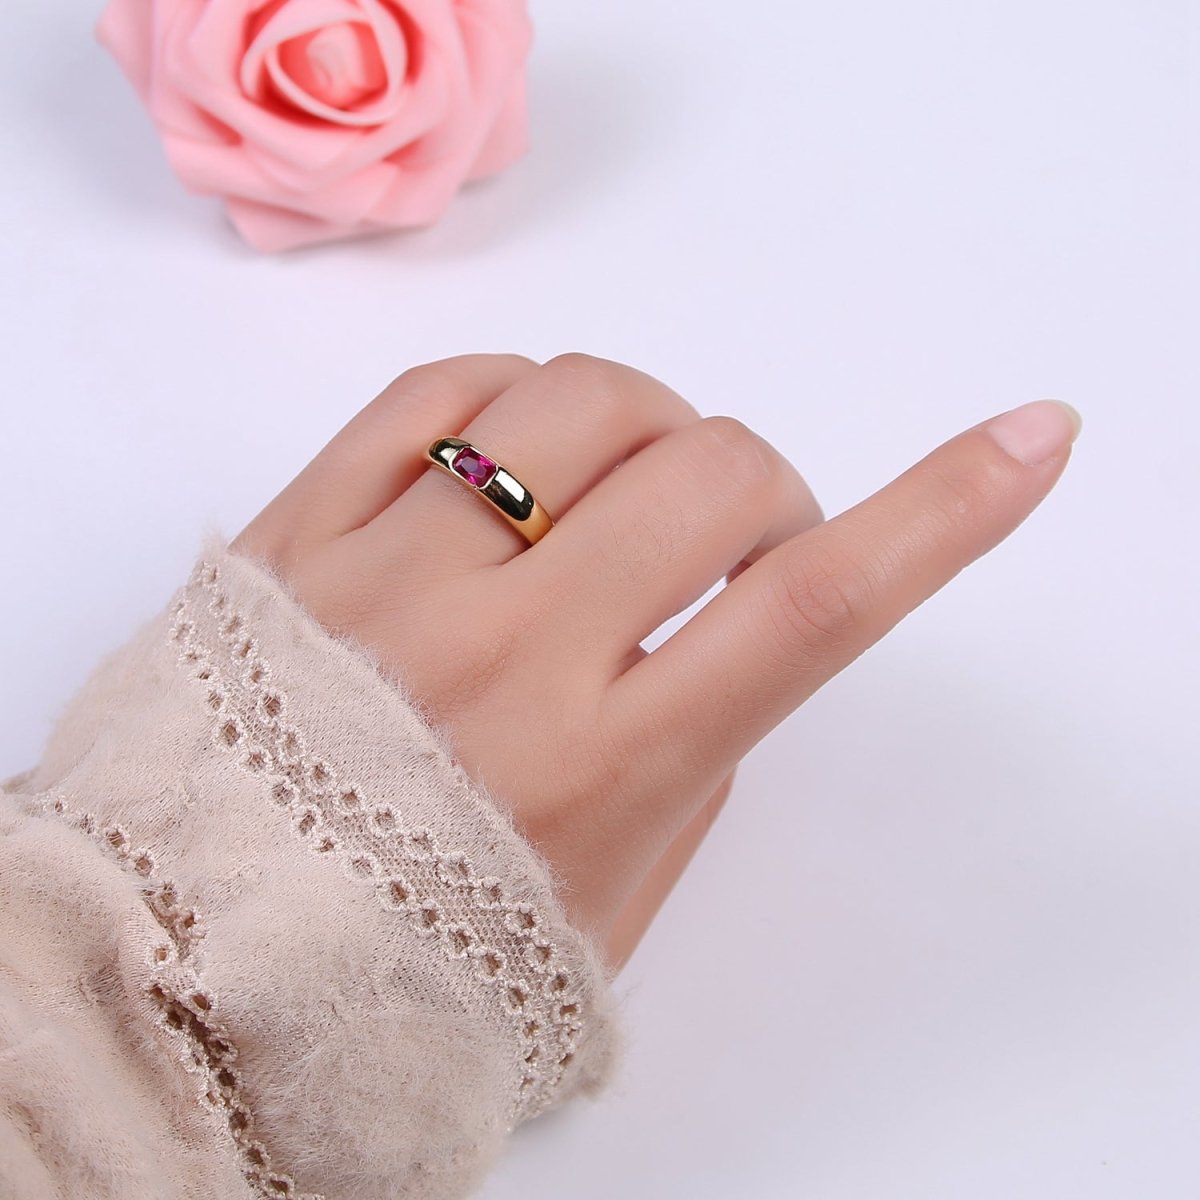 DEL-Minimalist 14k Gold Filled Ring With CZ Clear / Green / Pink Cz Stone Small Rectangle Open Adjustable U-316~U-318 - DLUXCA